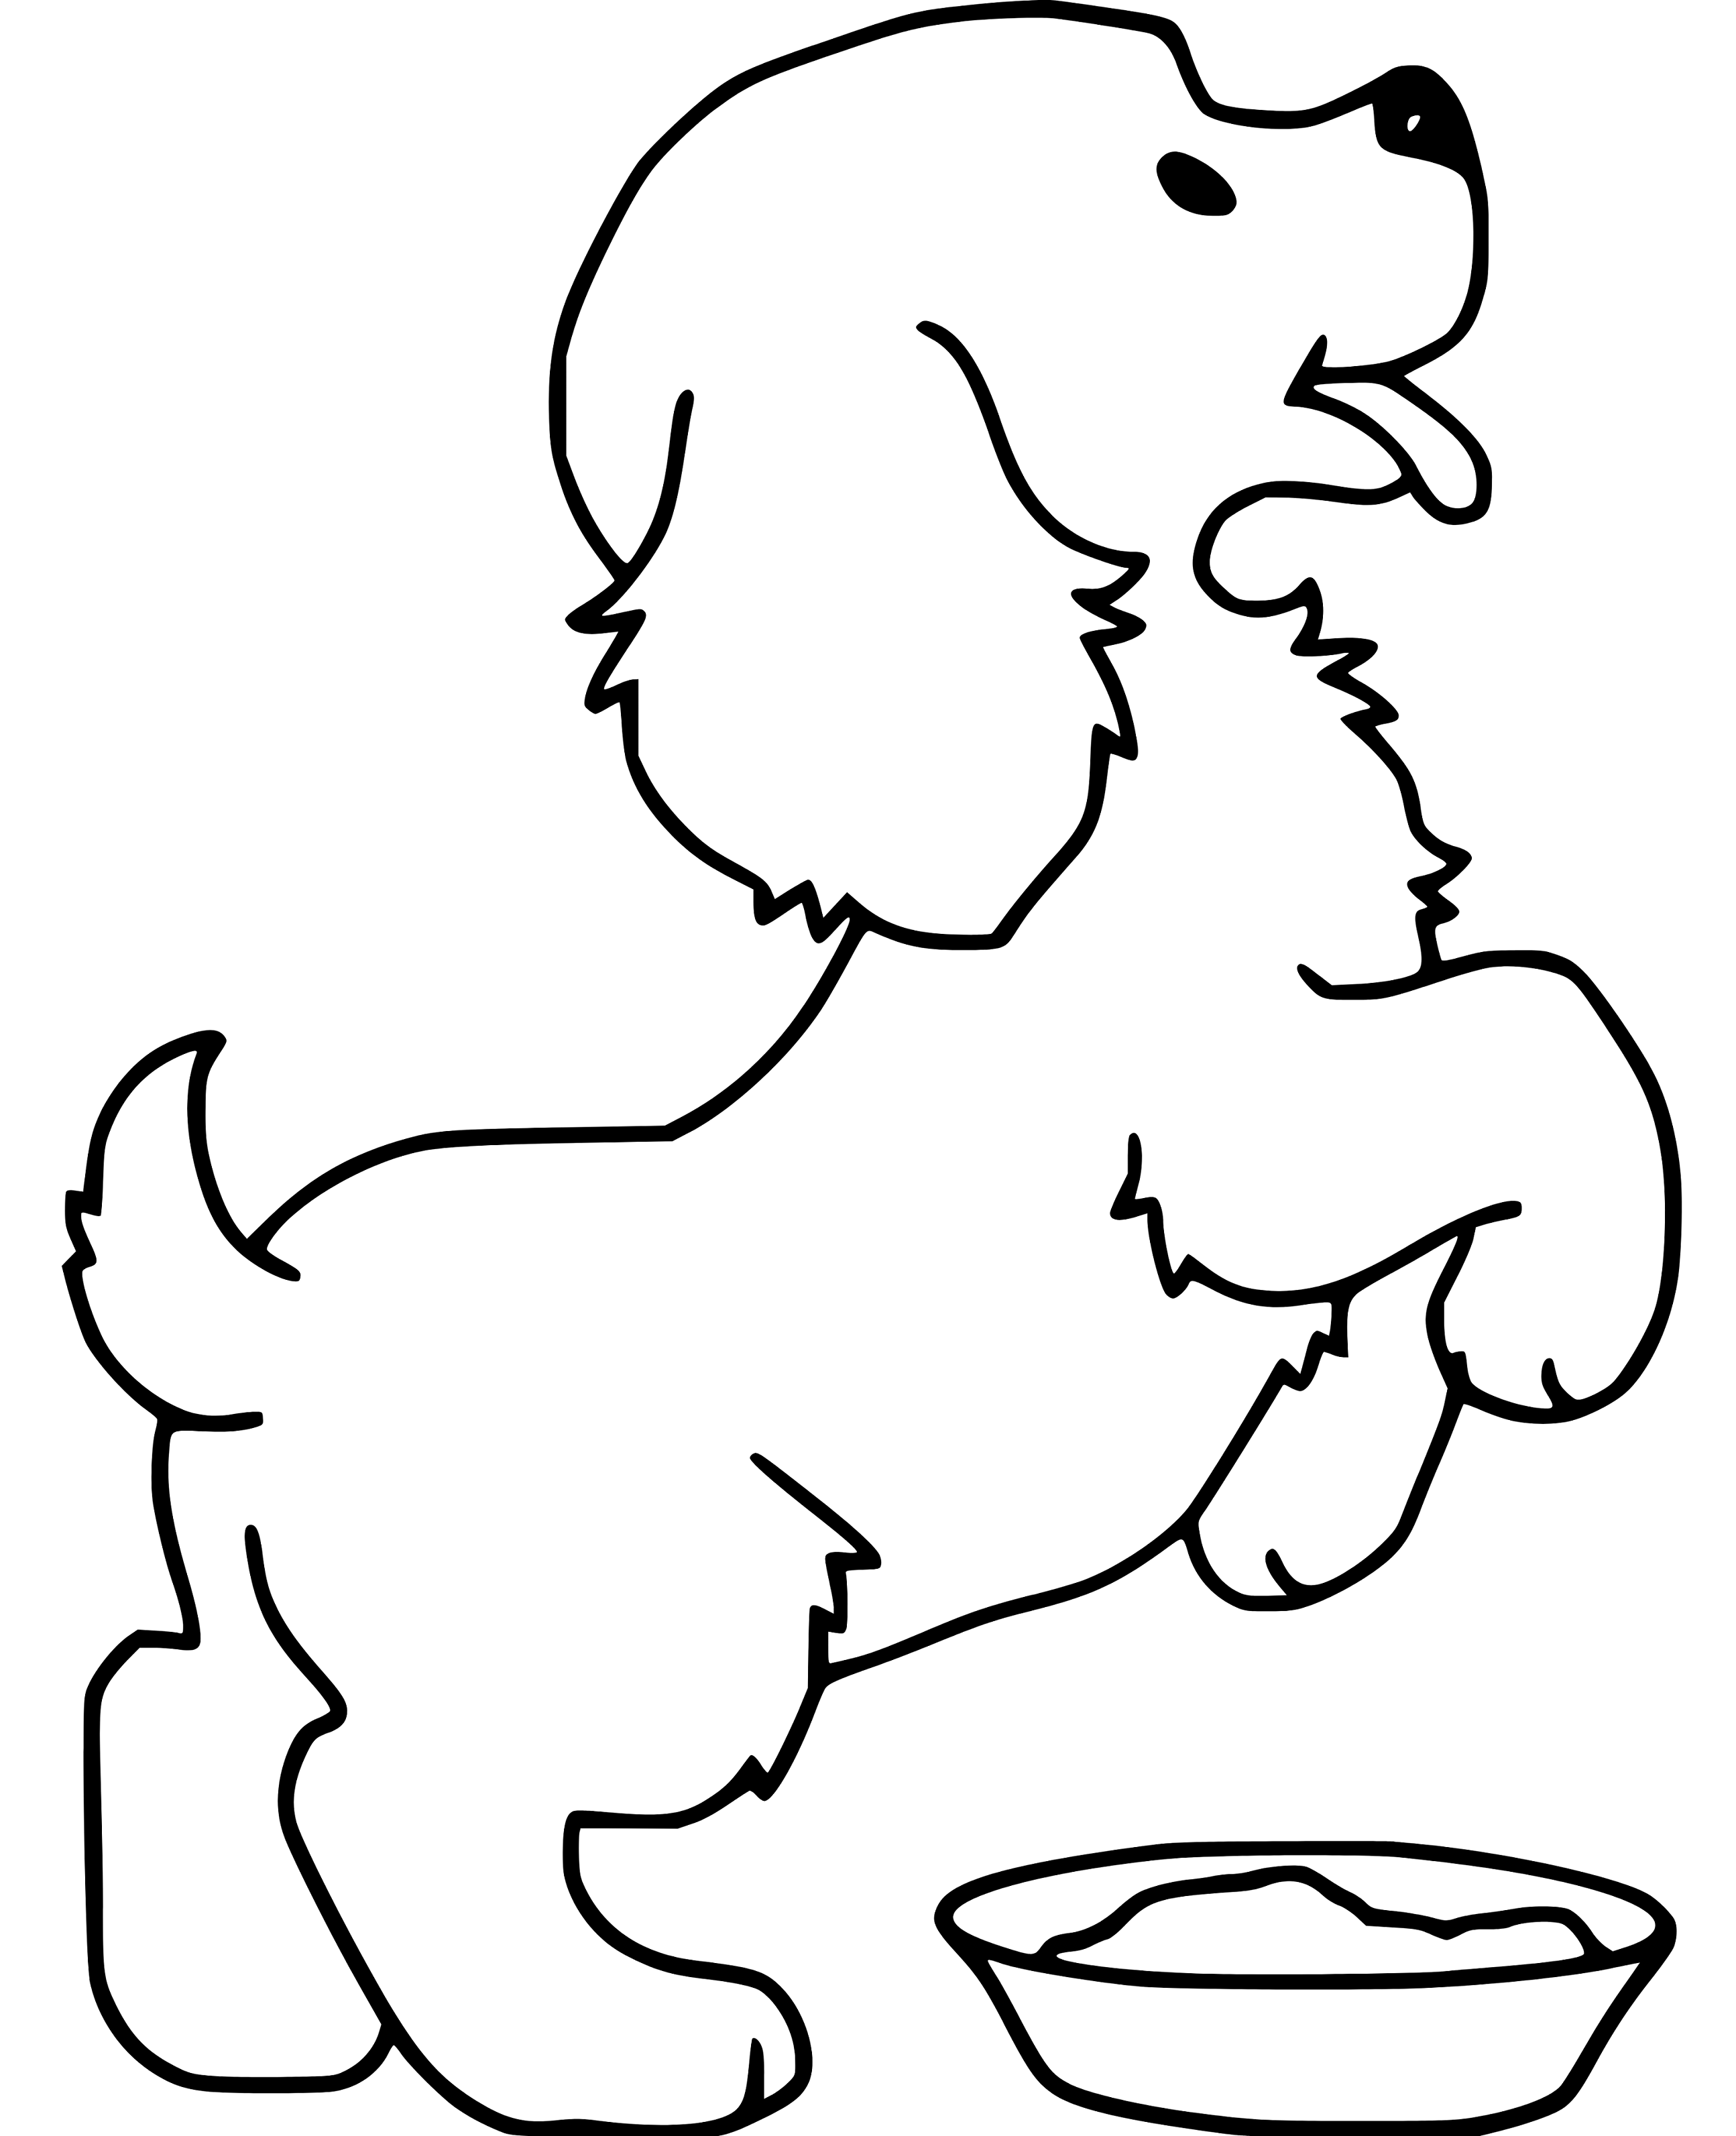 Puppy eating food Coloring Page for Kids - SheetalColor.com